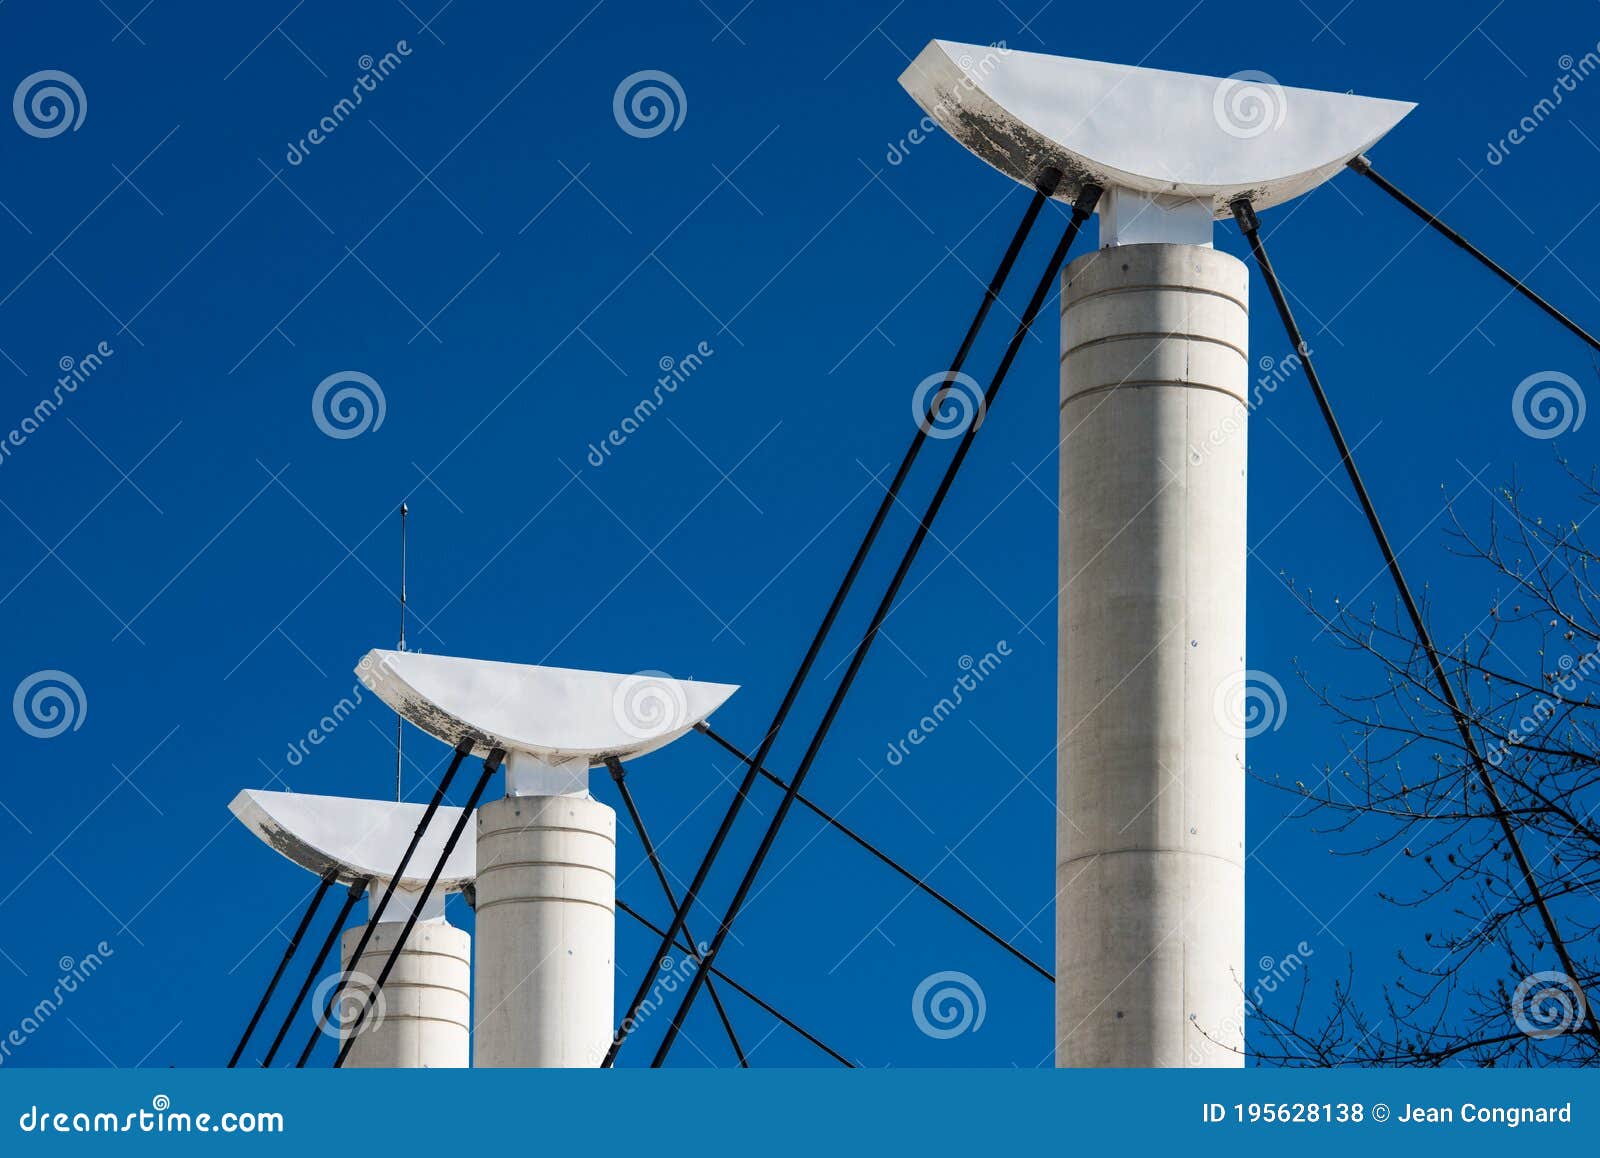 the columns of the stadium in barcelona spain